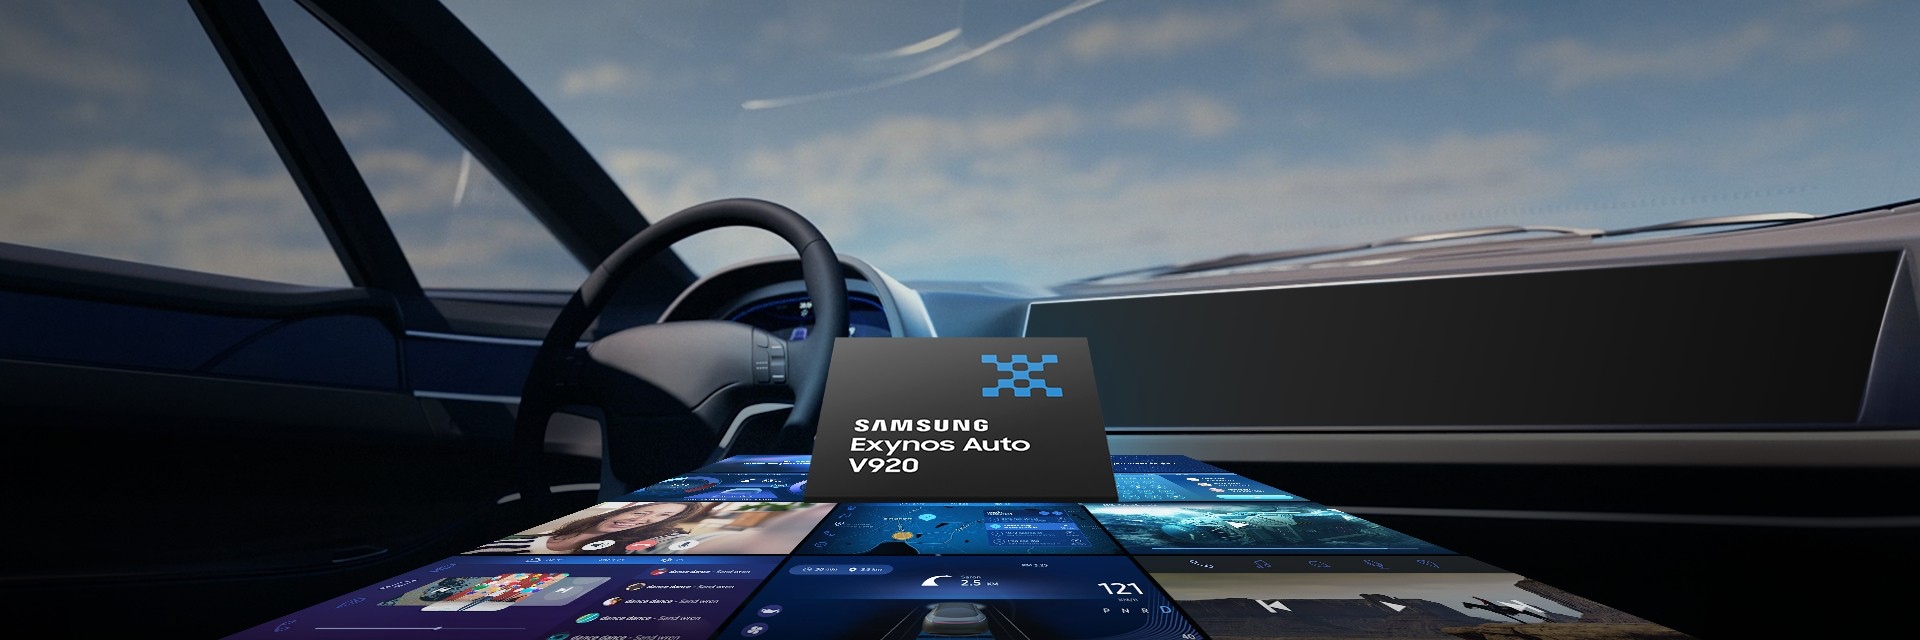 The Samsung Exynos Auto V920 product is positioned centrally in front of the circuit board image.